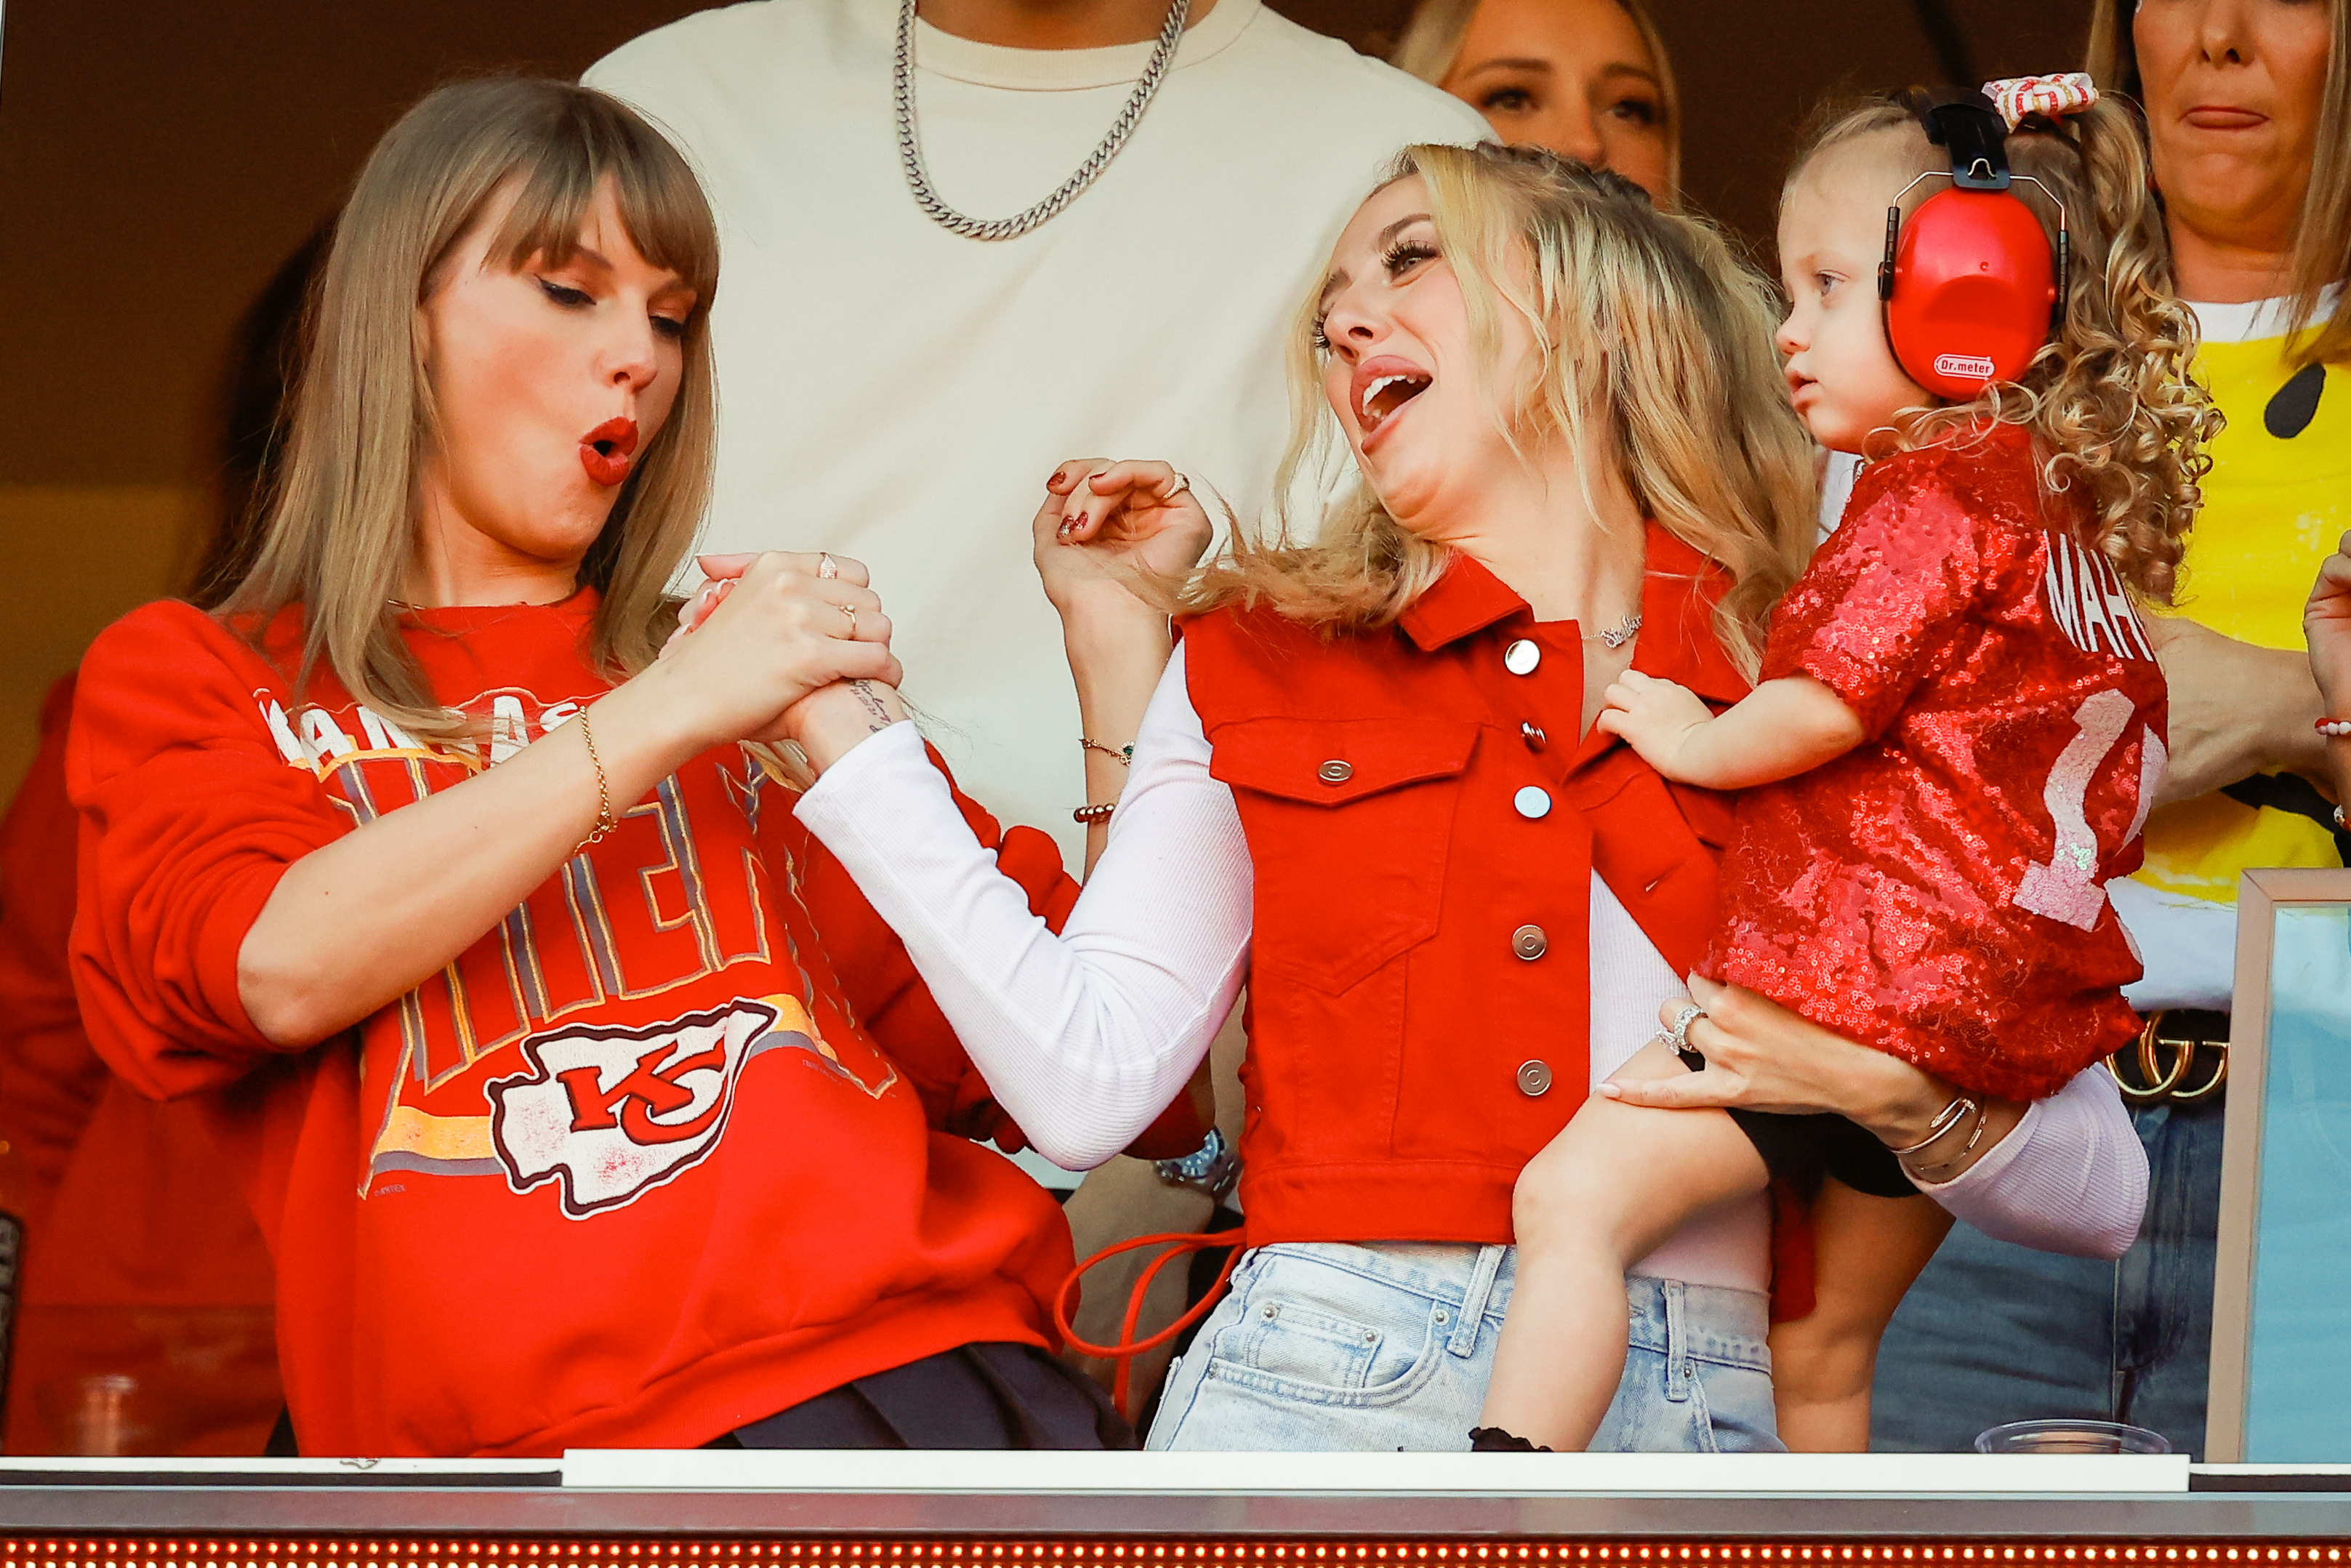 Taylor and Brittany at a game